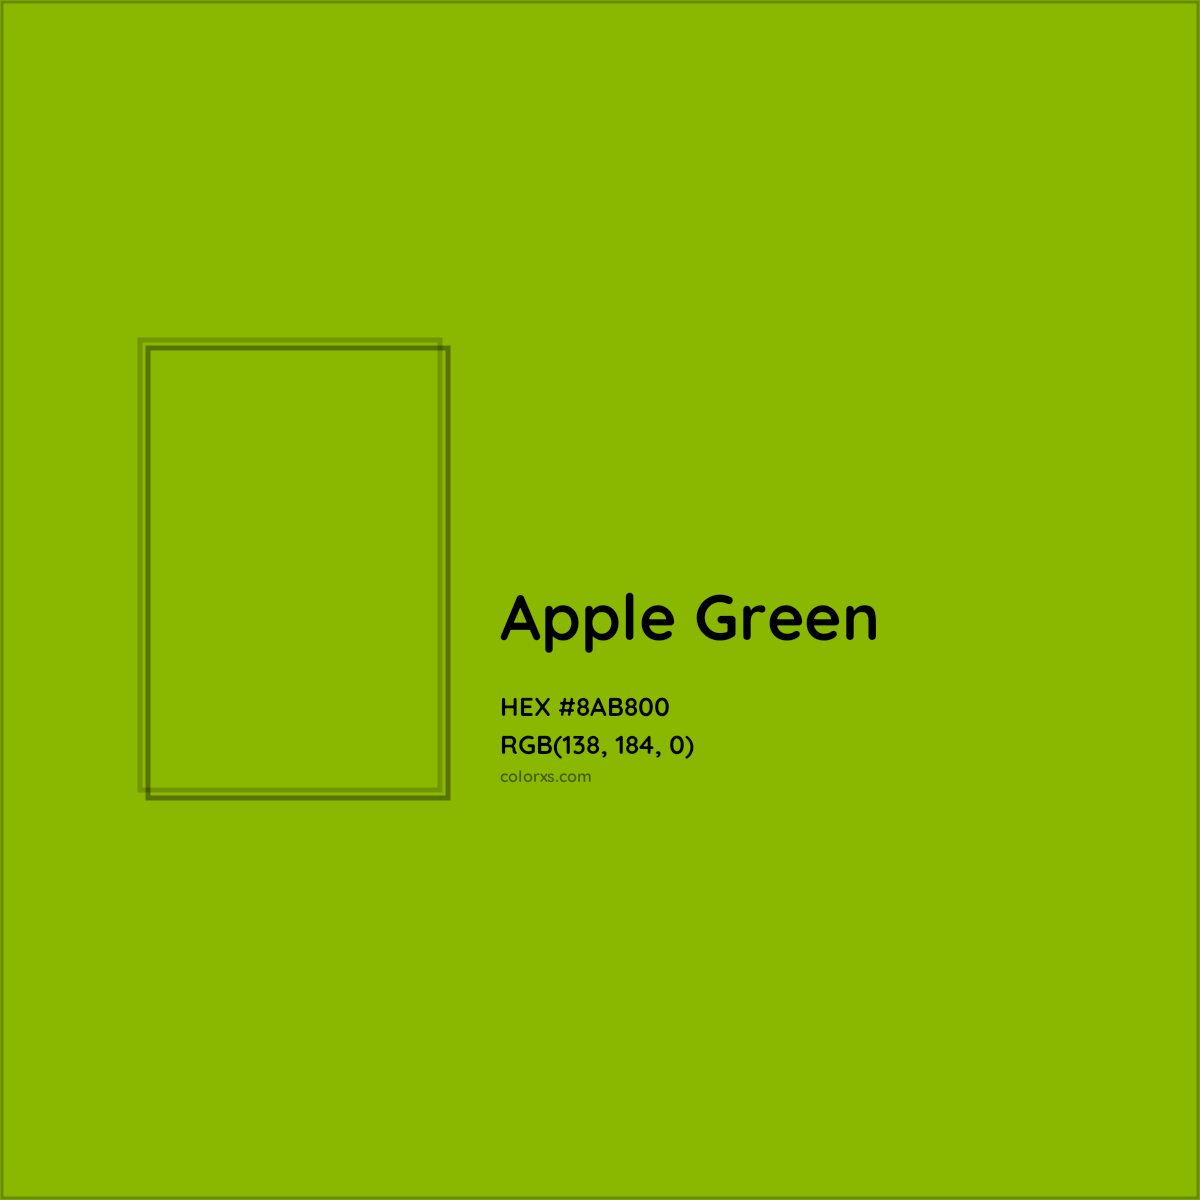 HEX #8AB800 Apple Green Color - Color Code